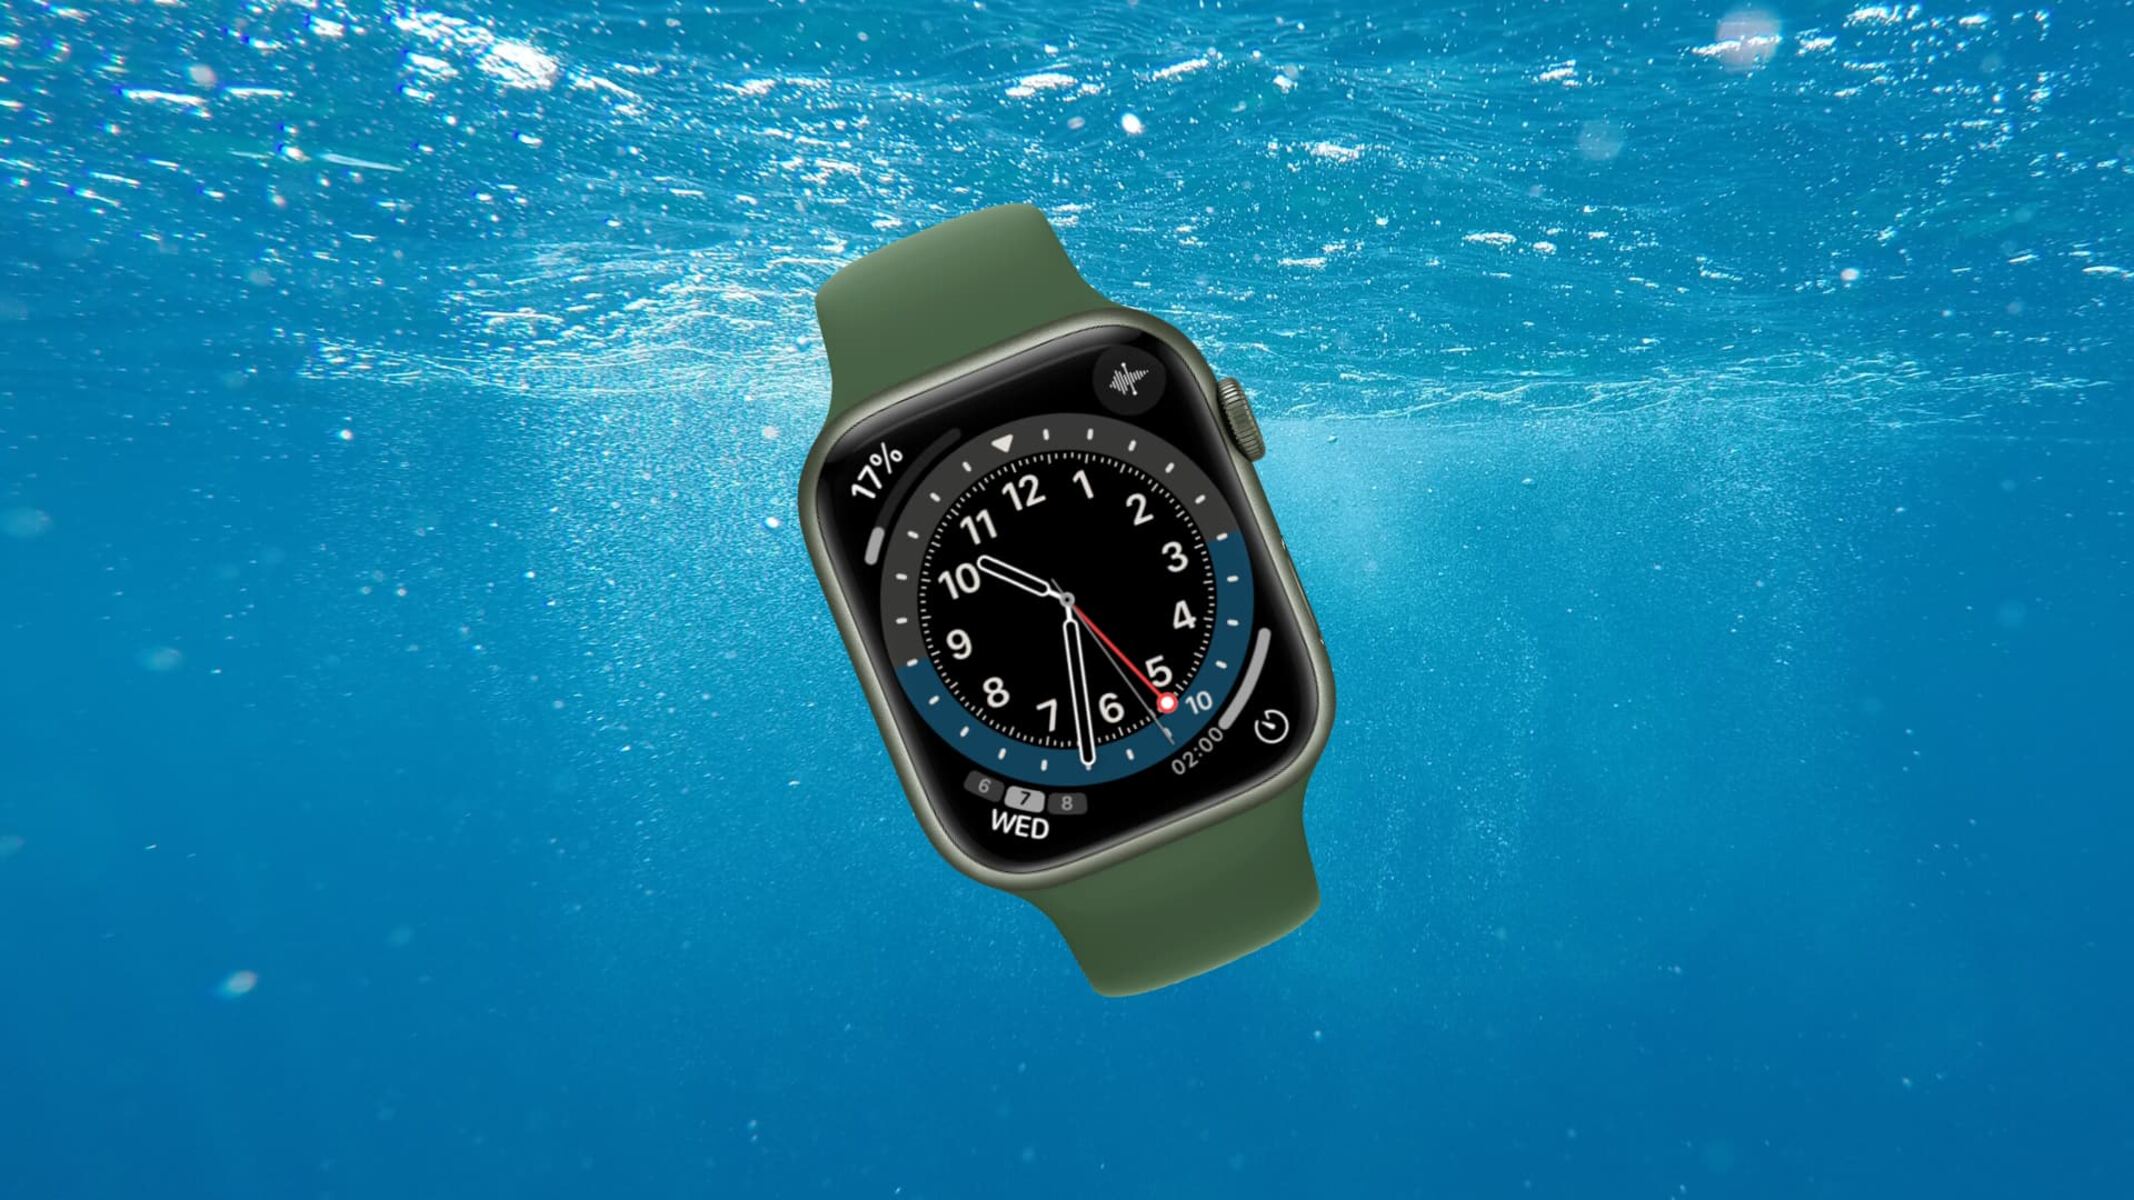 Dealing With Water Inside Smartwatch: Quick Tips